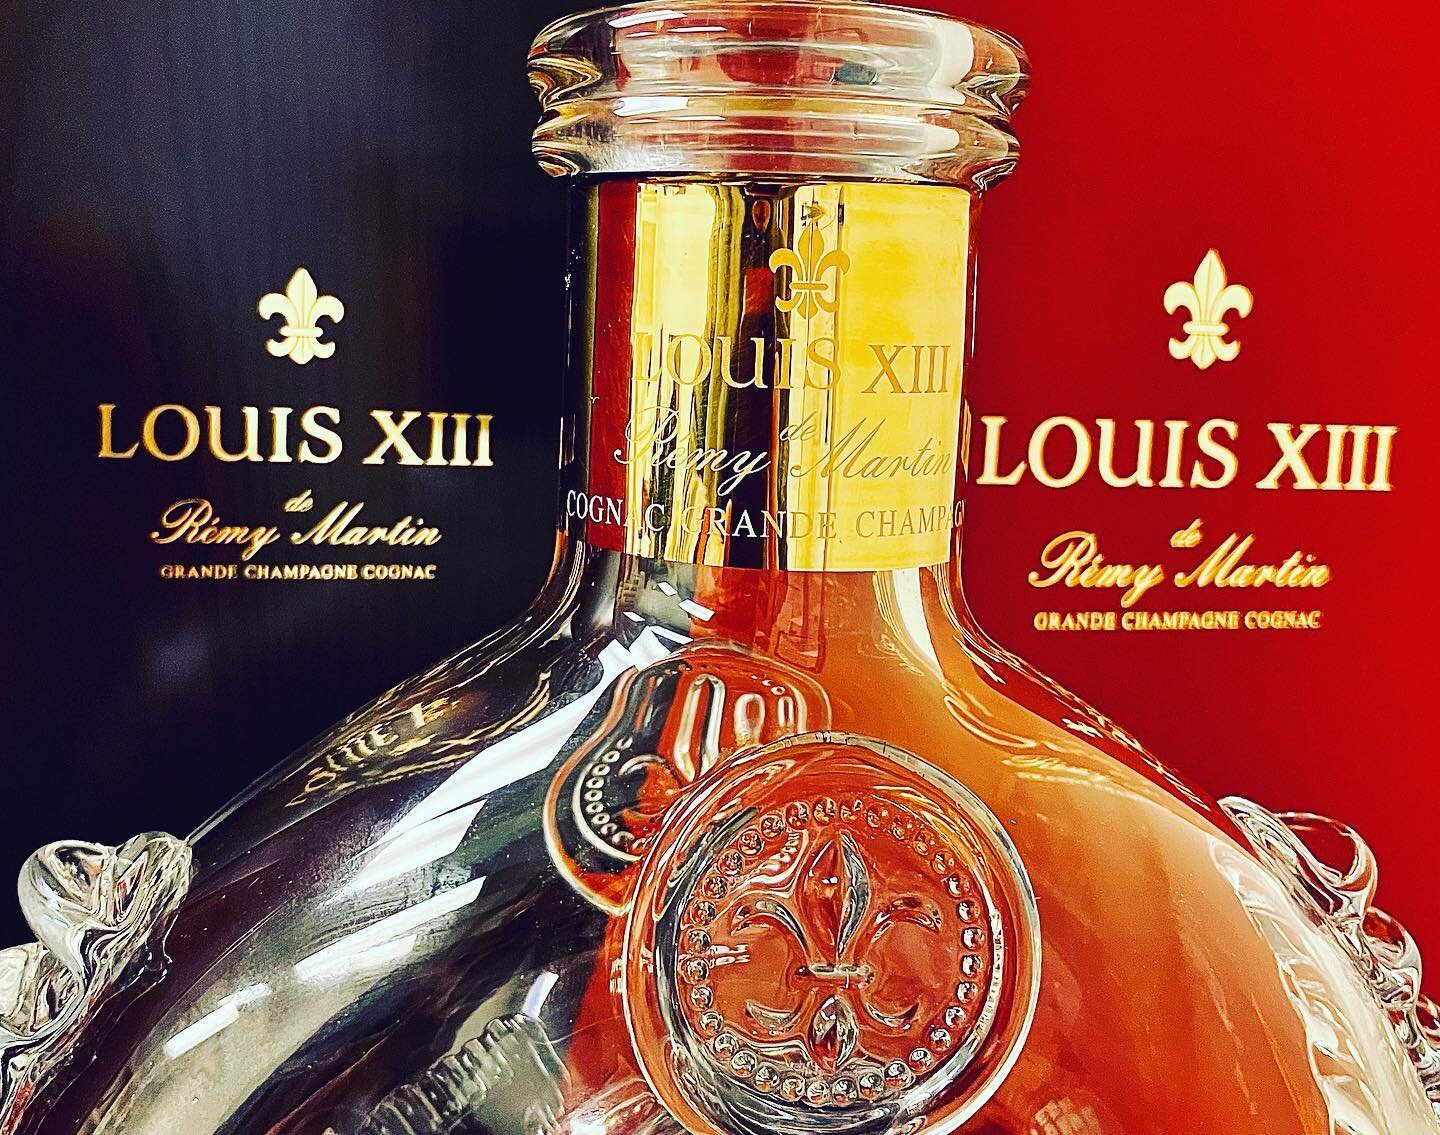 Luckily I didn&rsquo;t spill a drop while recently serving some Louis XIII. I&rsquo;m not big on overly fancy service but if I had white gloves I would have worn them while pouring from the beautiful fleurs de lys engraved Baccarat crystal decanter. 